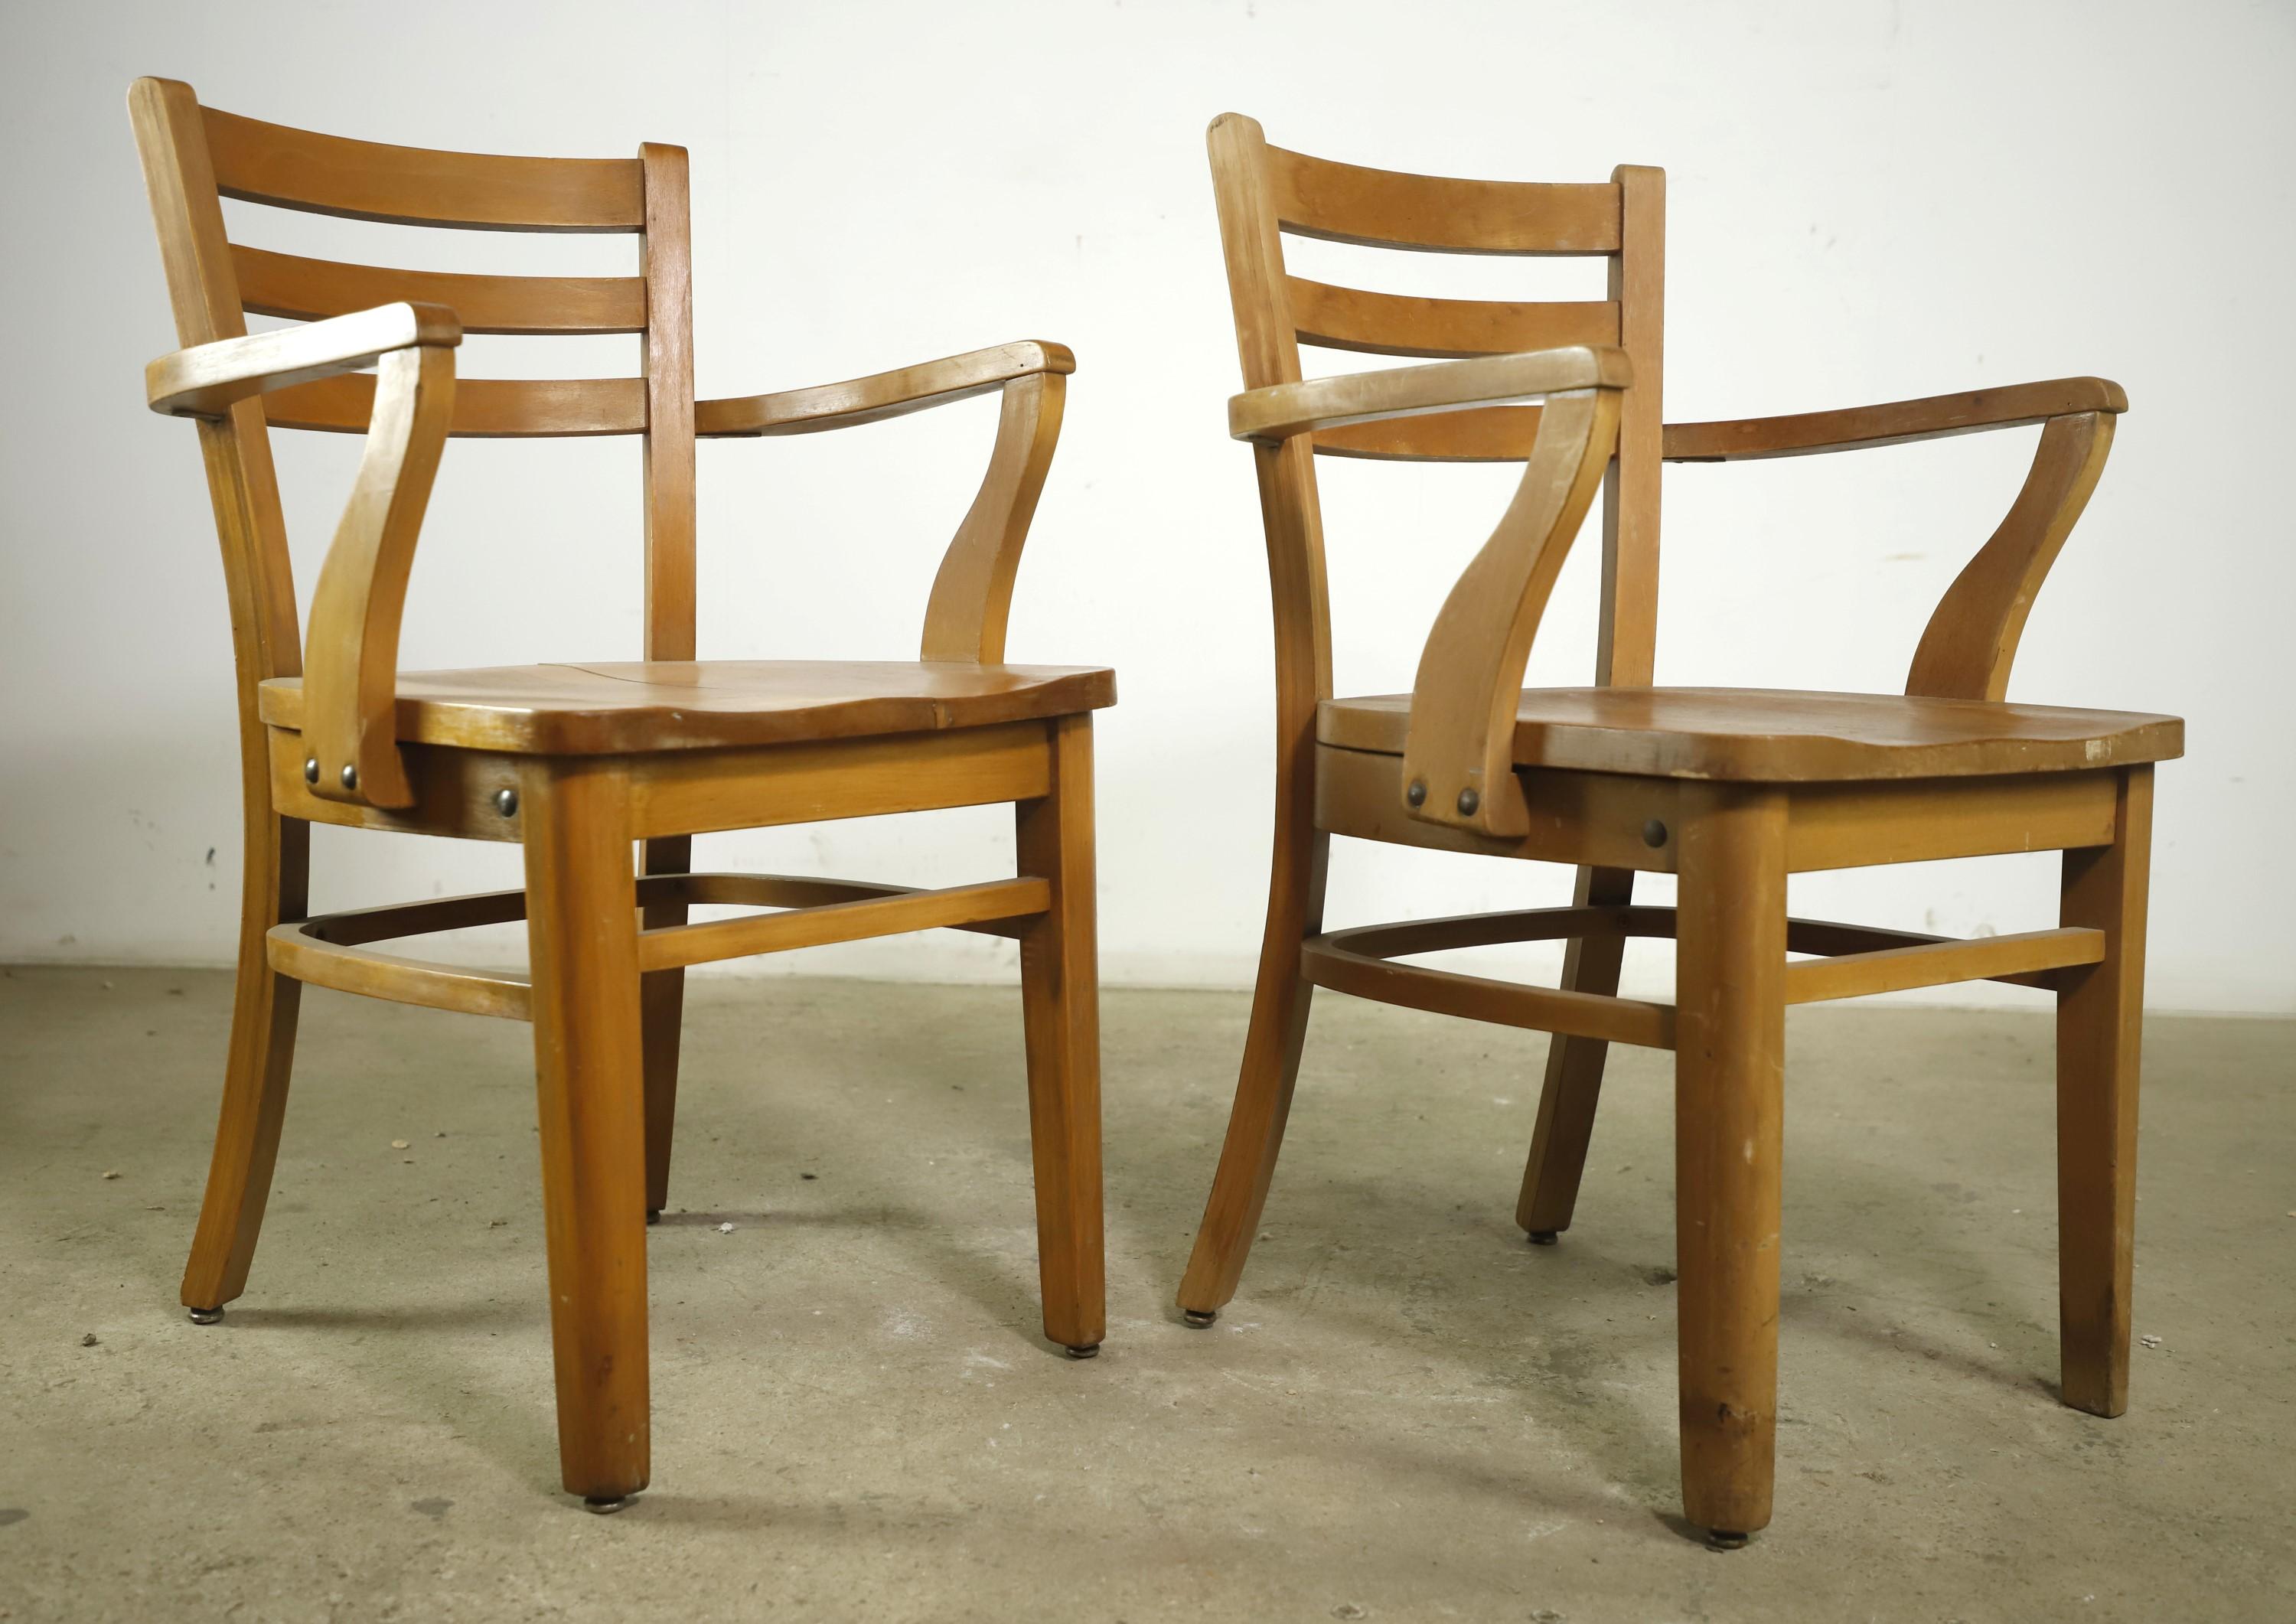 Early 20th century solid maple arm chairs made in a ladderback style. Manufactured by the National Store Fixture Co., Odenton, MD. The National Store Fixture Company was a woodworking business in Baltimore prior to 1941. Priced as a pair. Please